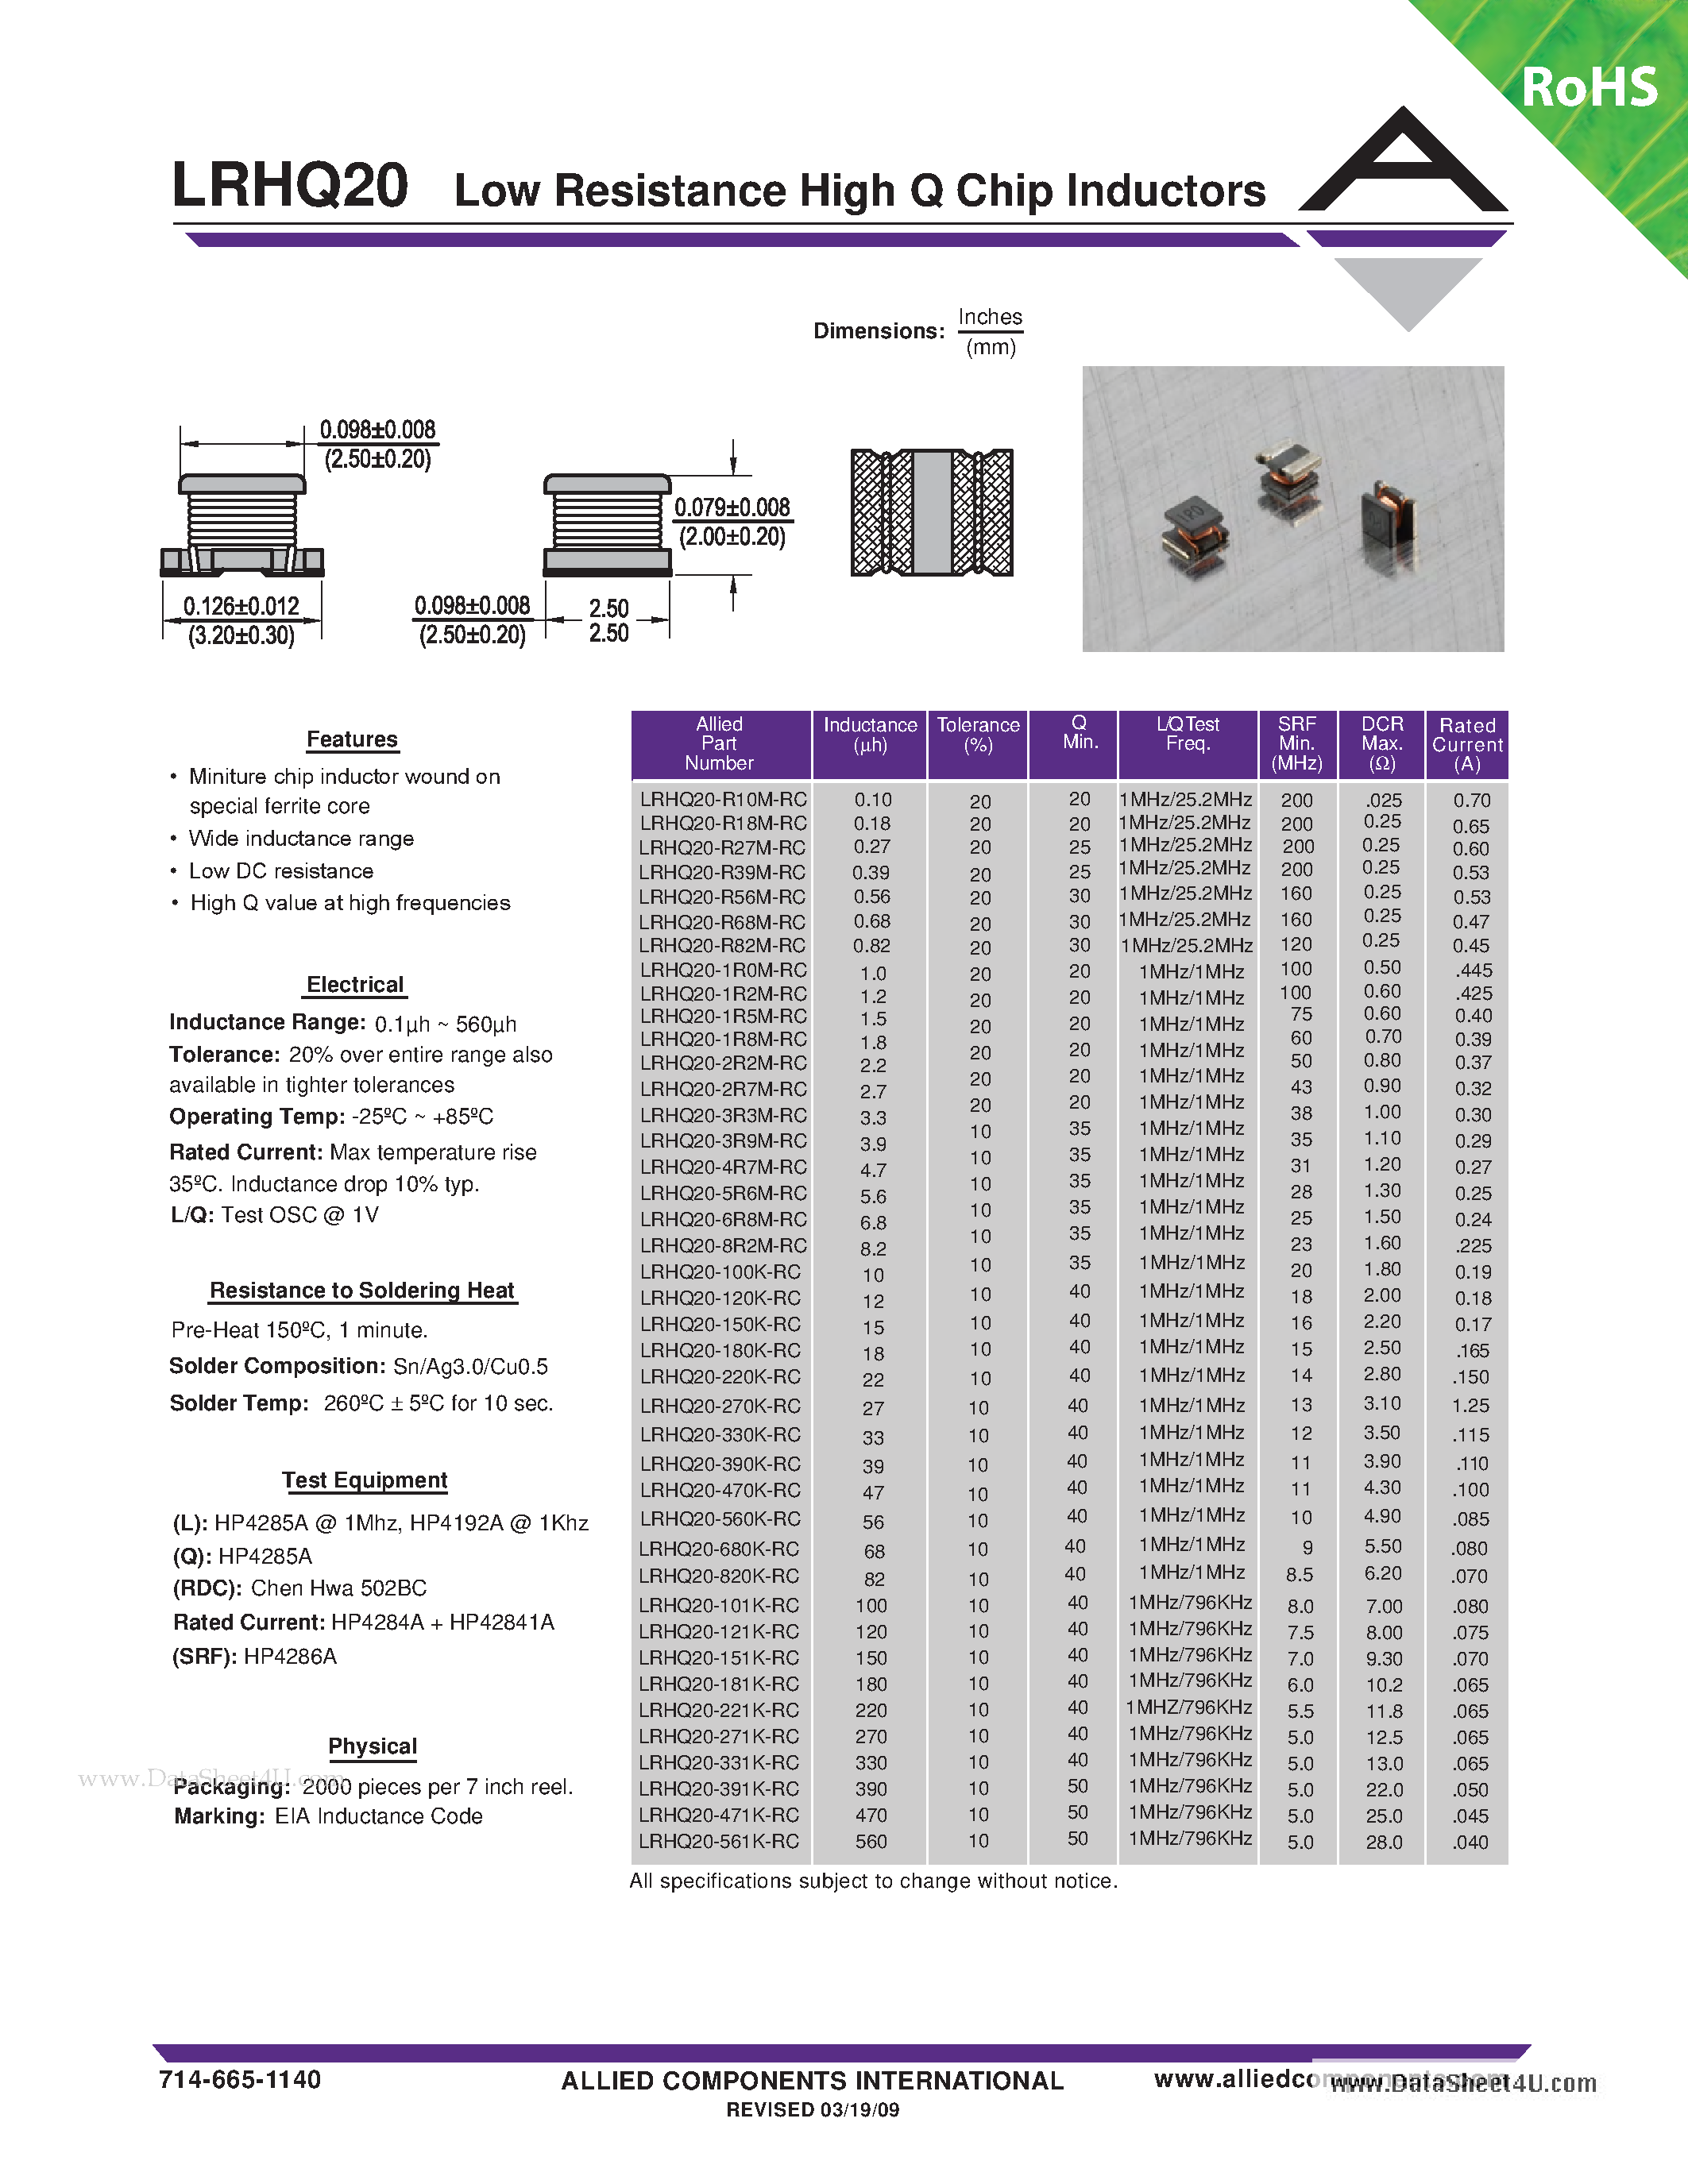 Datasheet LRHQ20 - Low Resistance High Q Chip Inductors page 1